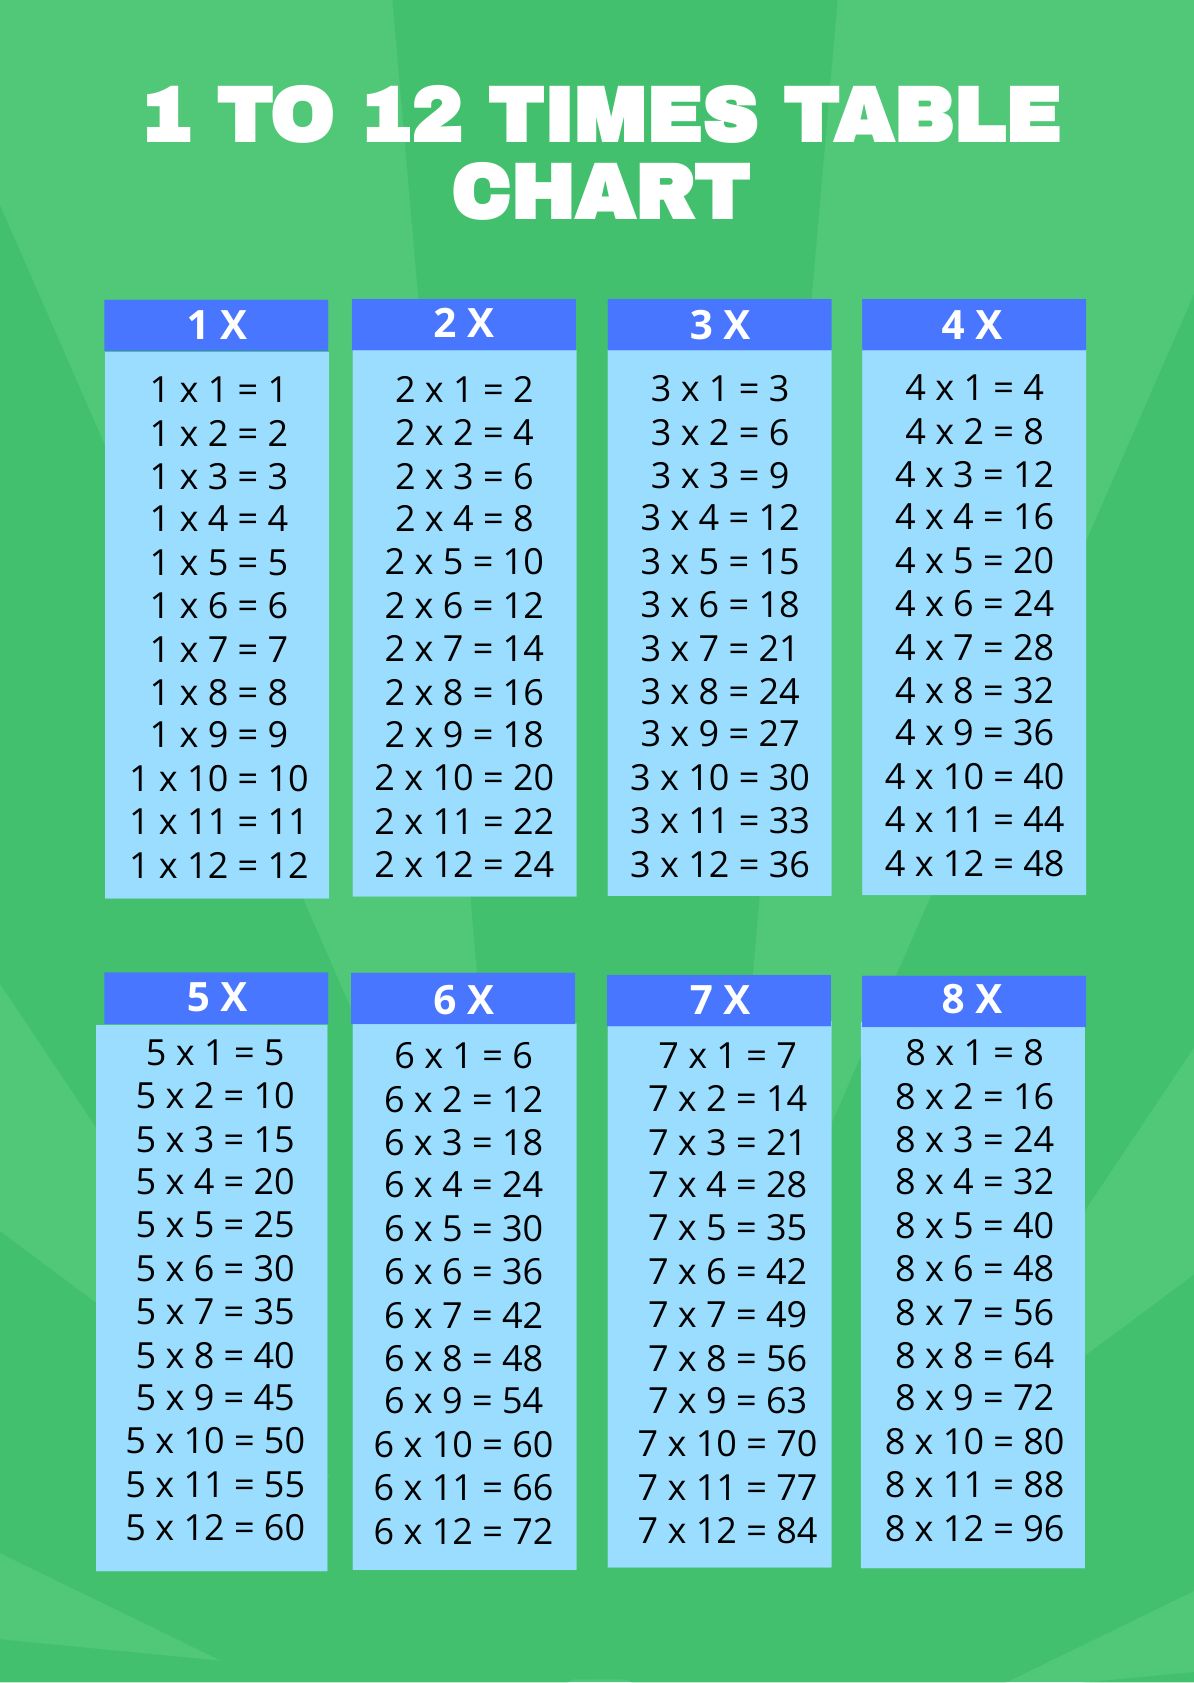 Times Table Chart 1 12 in PDF